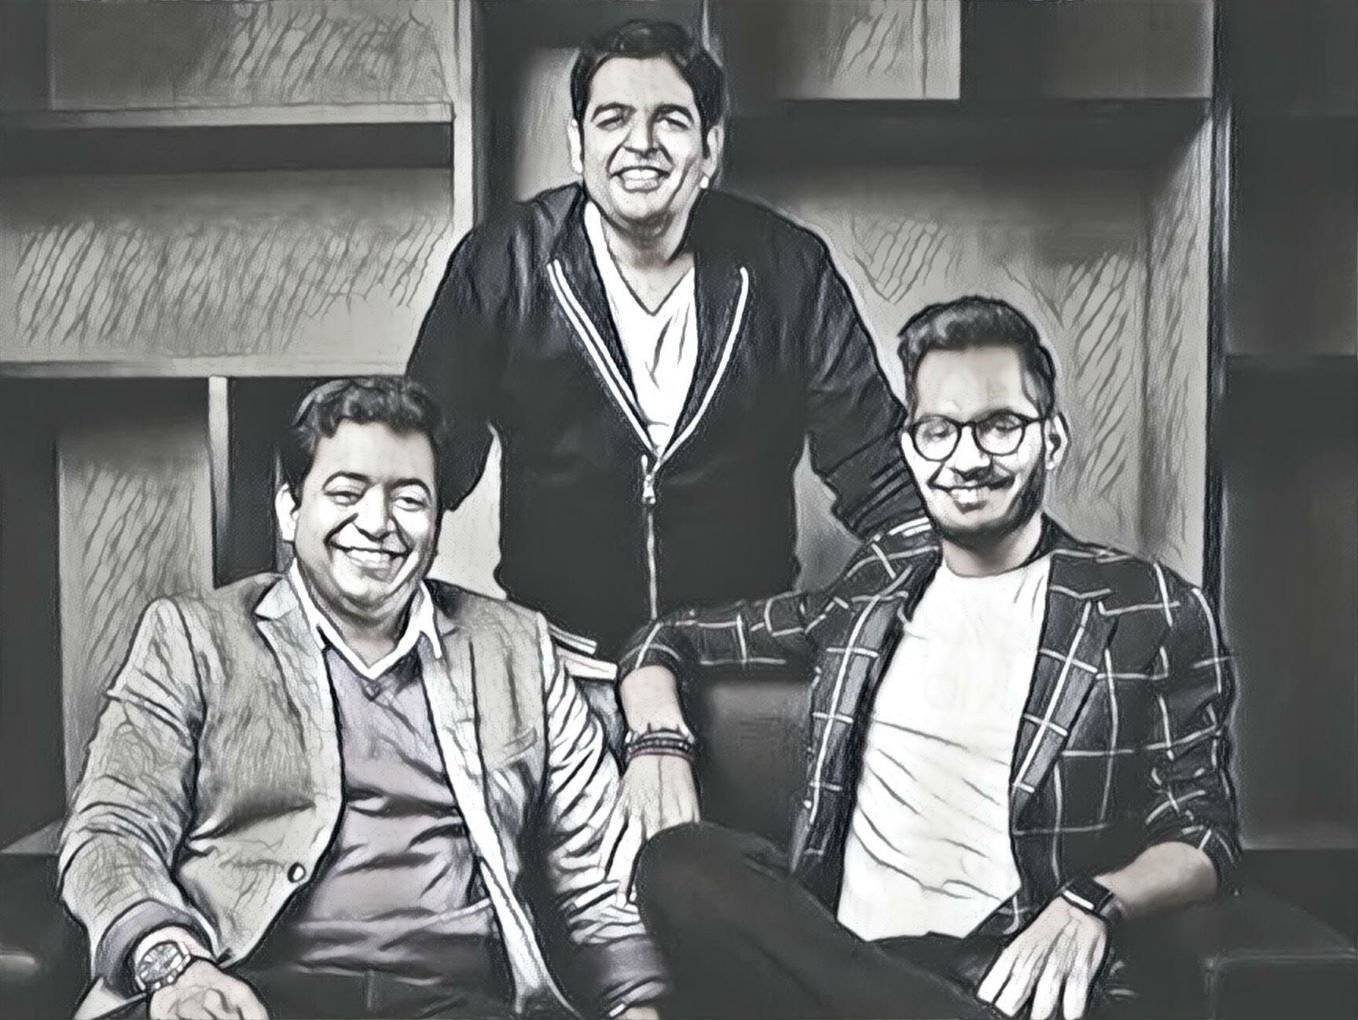 Unacademy Secures $50 Mn In Mega Funding Round From Steadview, Sequoia And Others